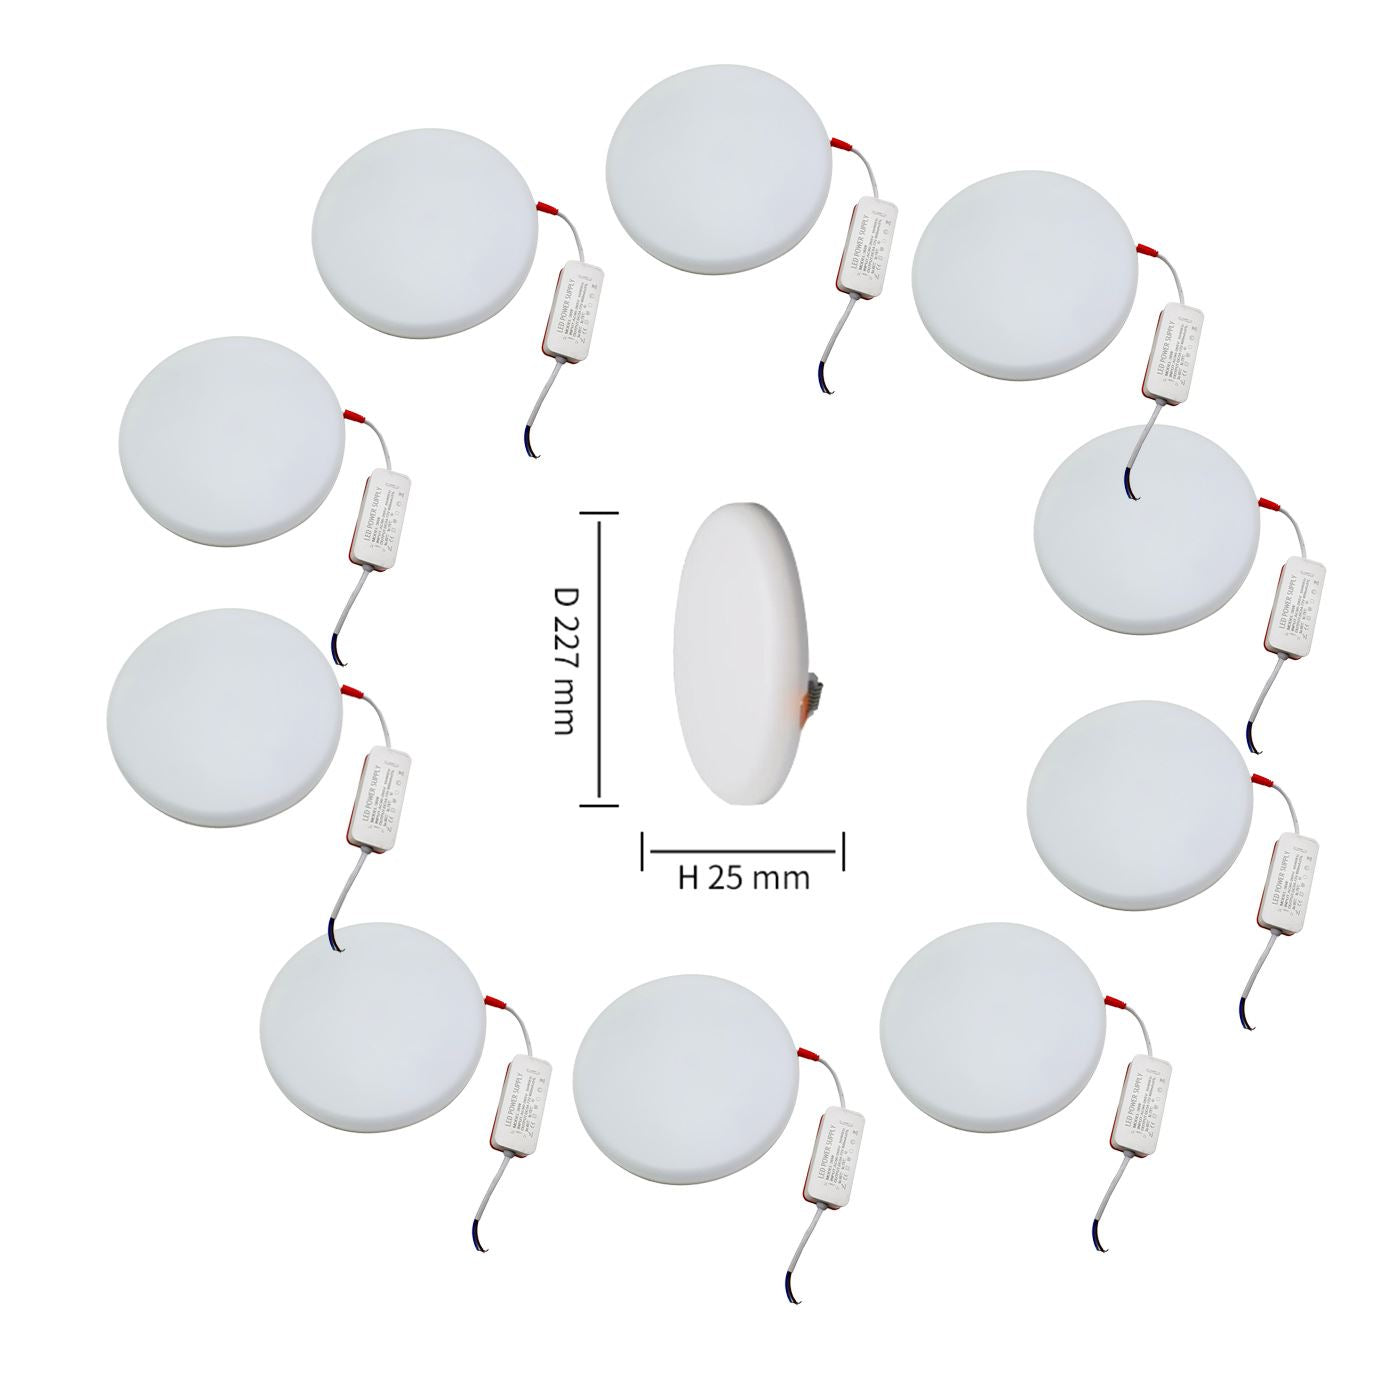 Modern LED Round Recessed Ultra slim Ceiling Flat Panel down Light Cool White Indoor Light